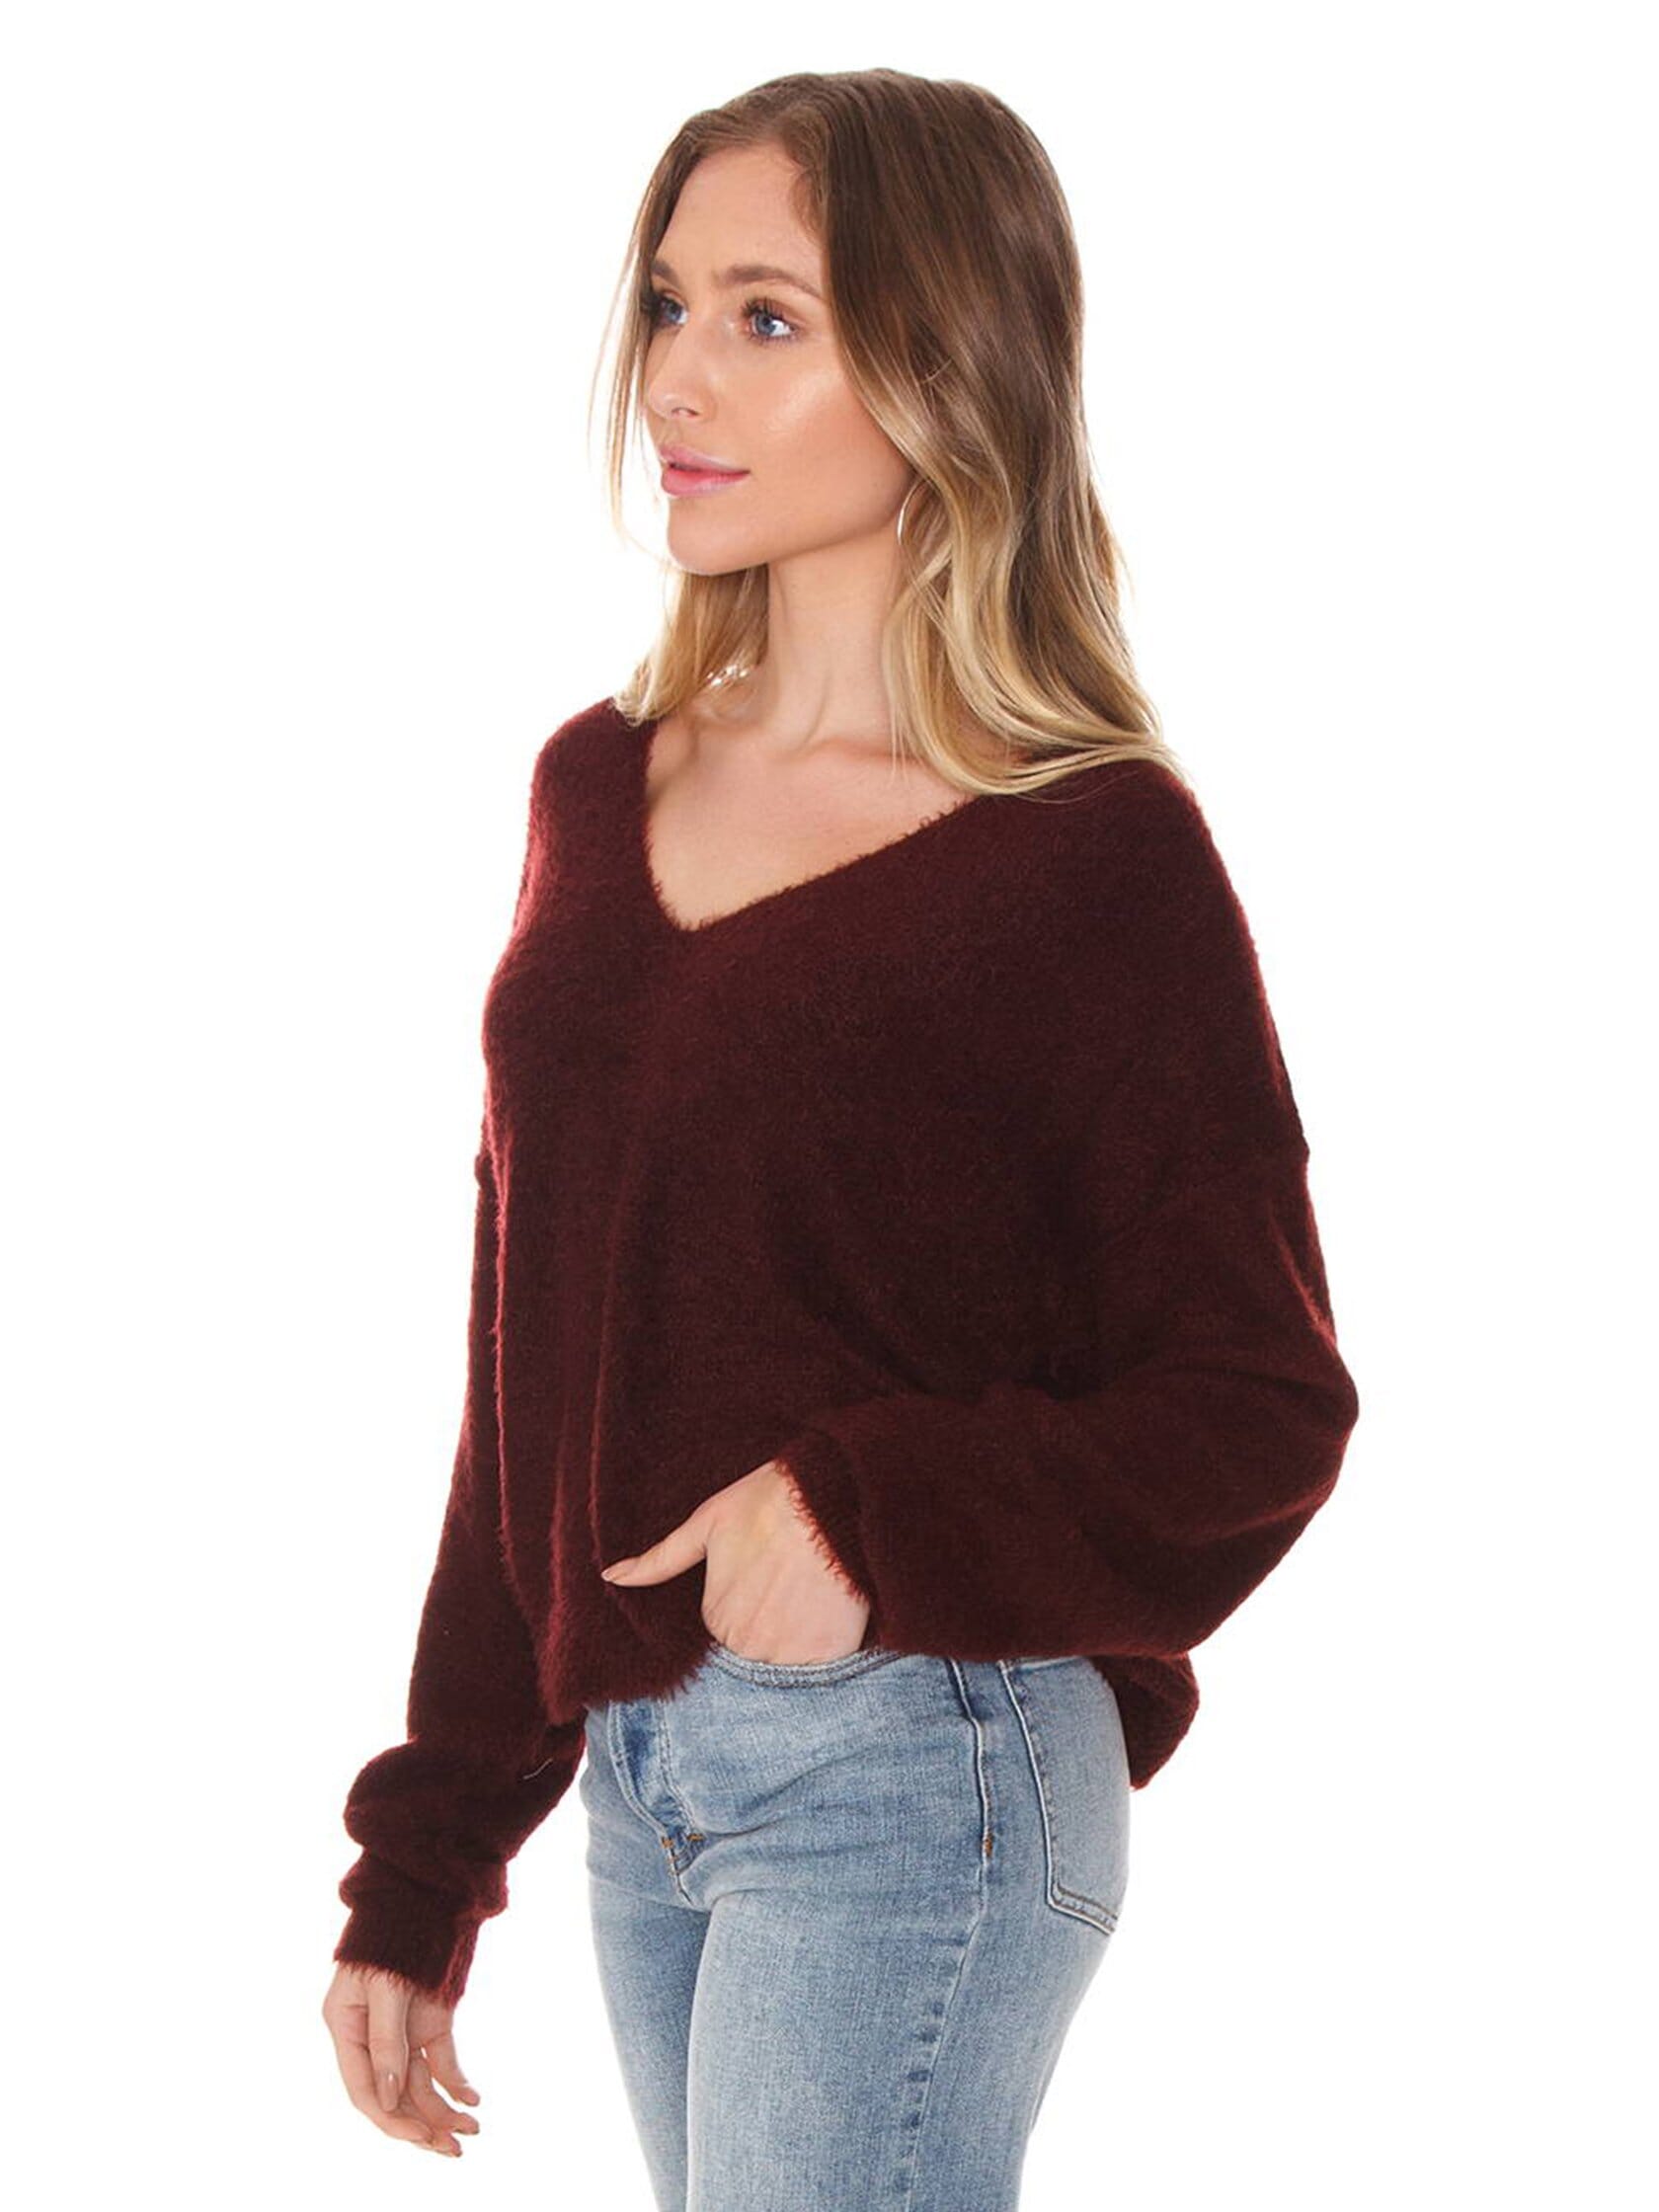 Free People Princess V Sweater in Wine